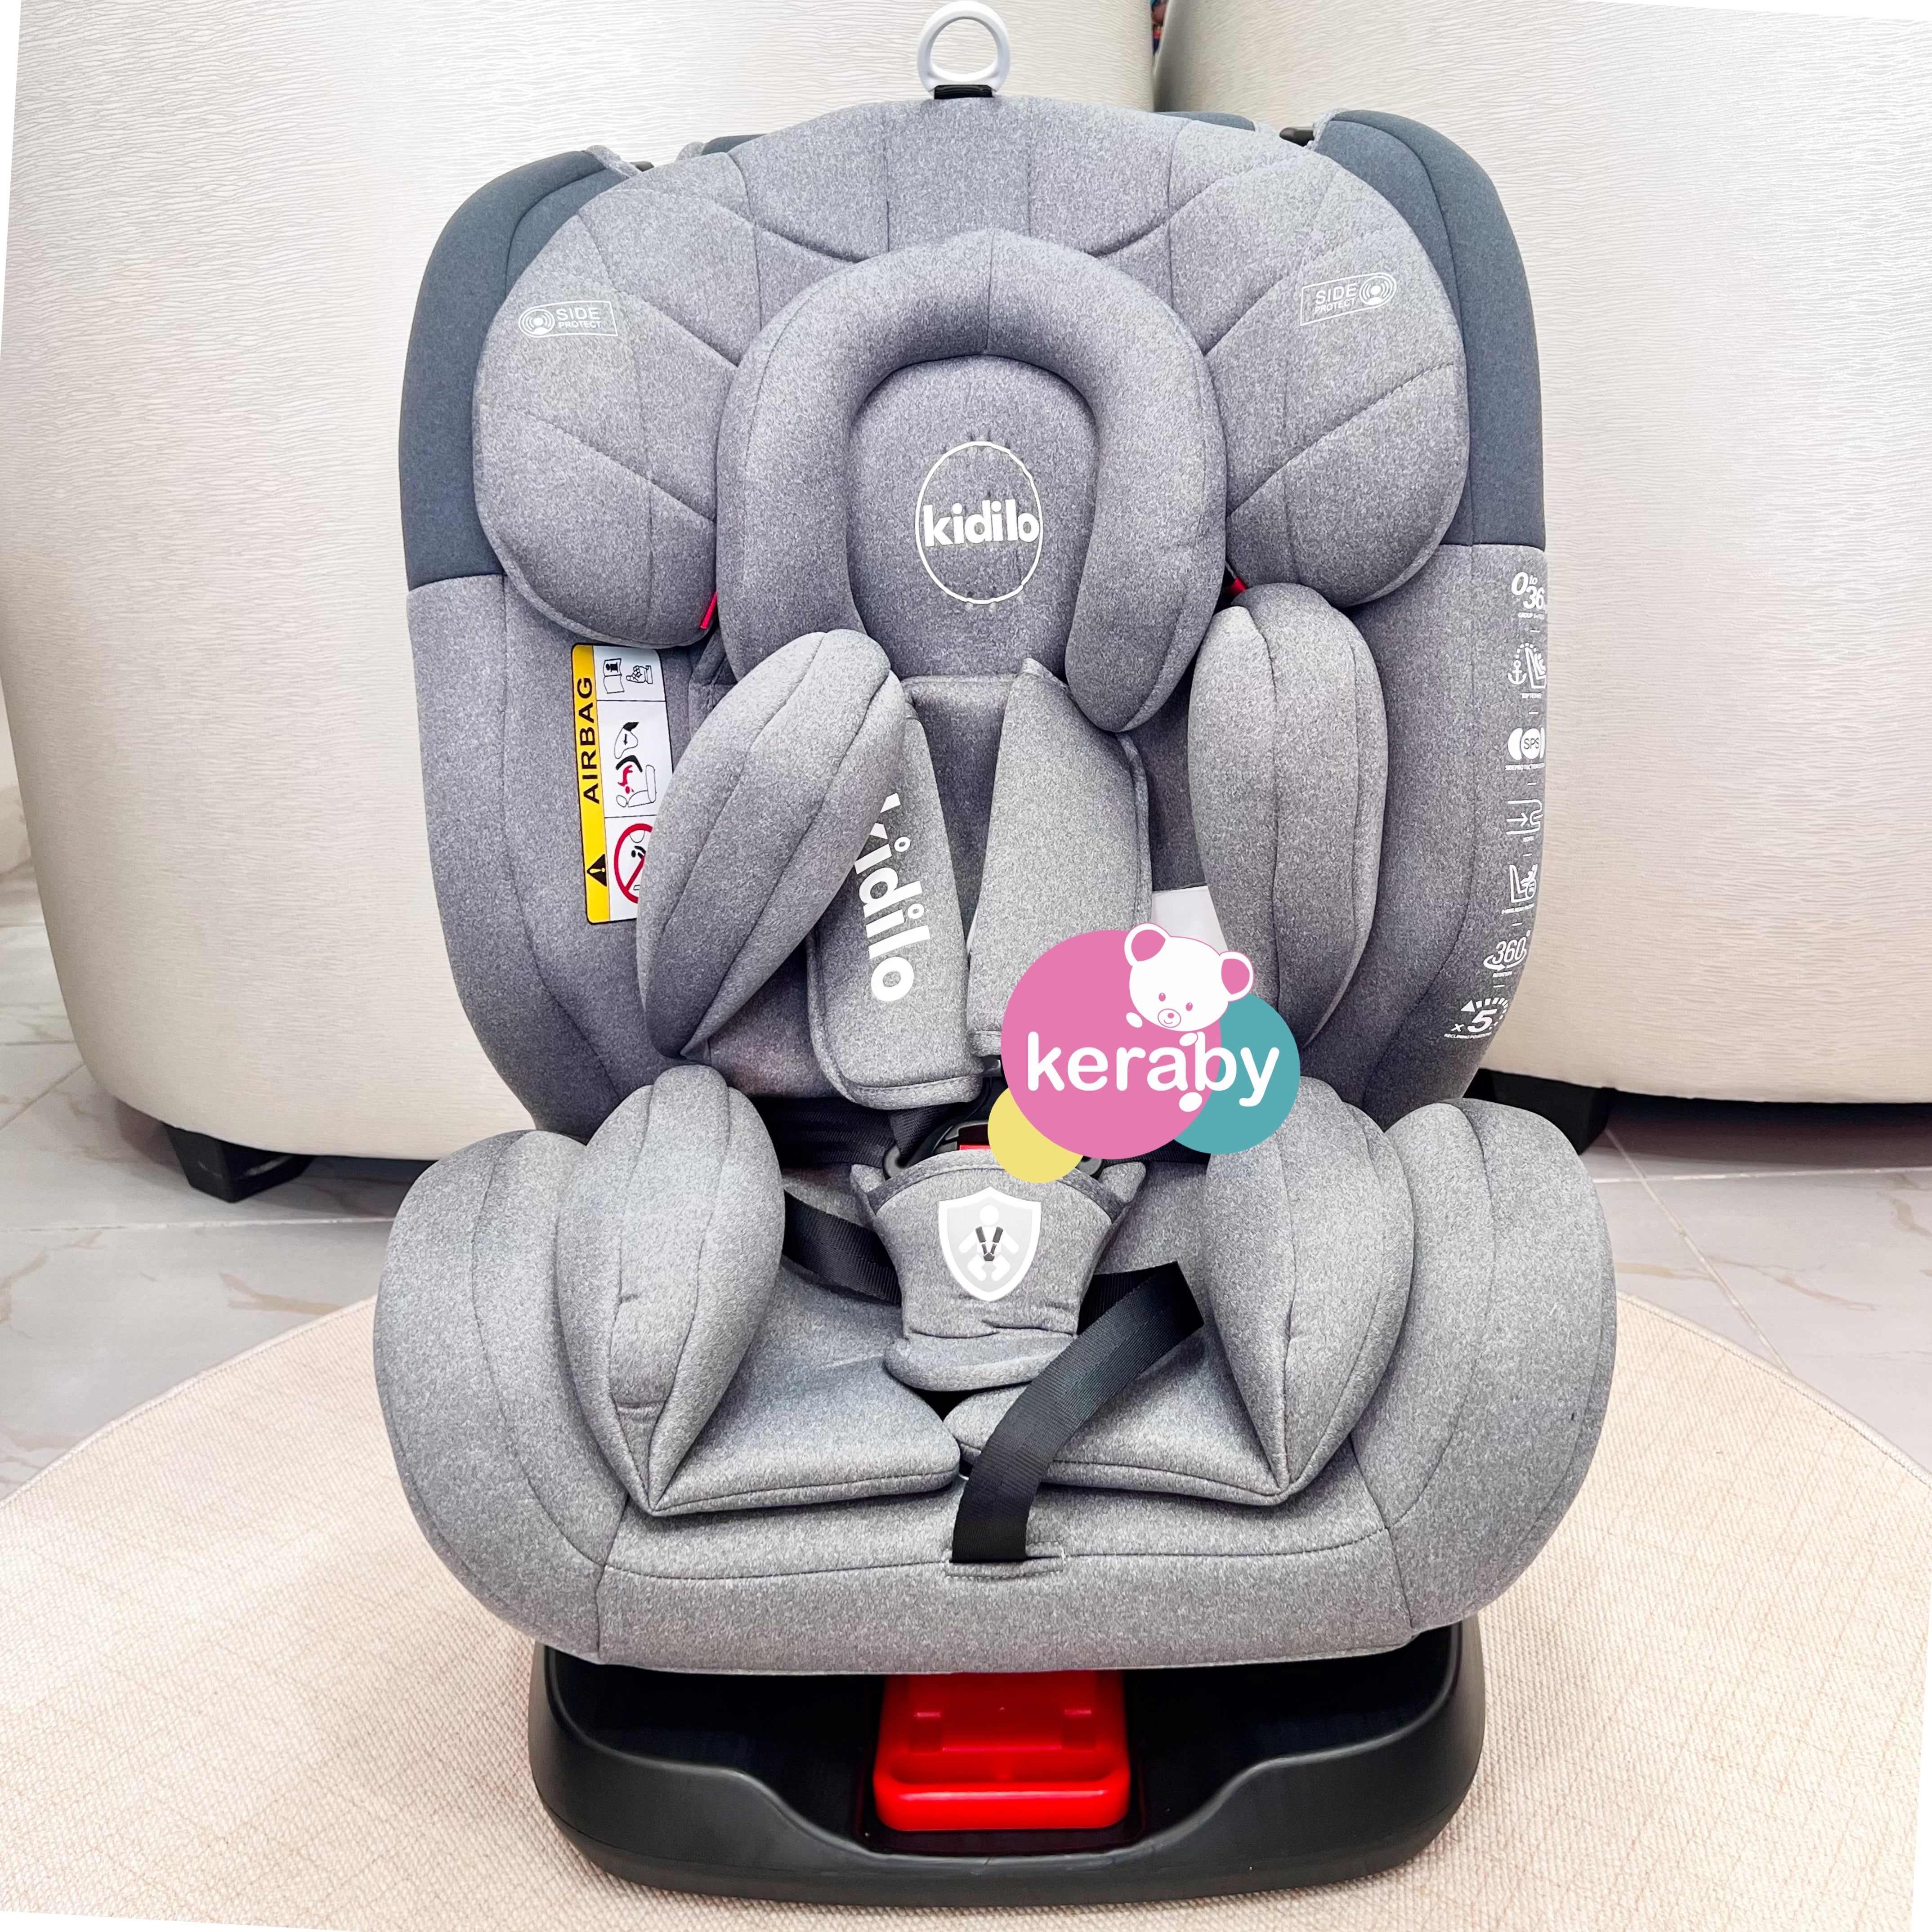 Ayadi Baby Shop - Siège auto portable inclinable pour